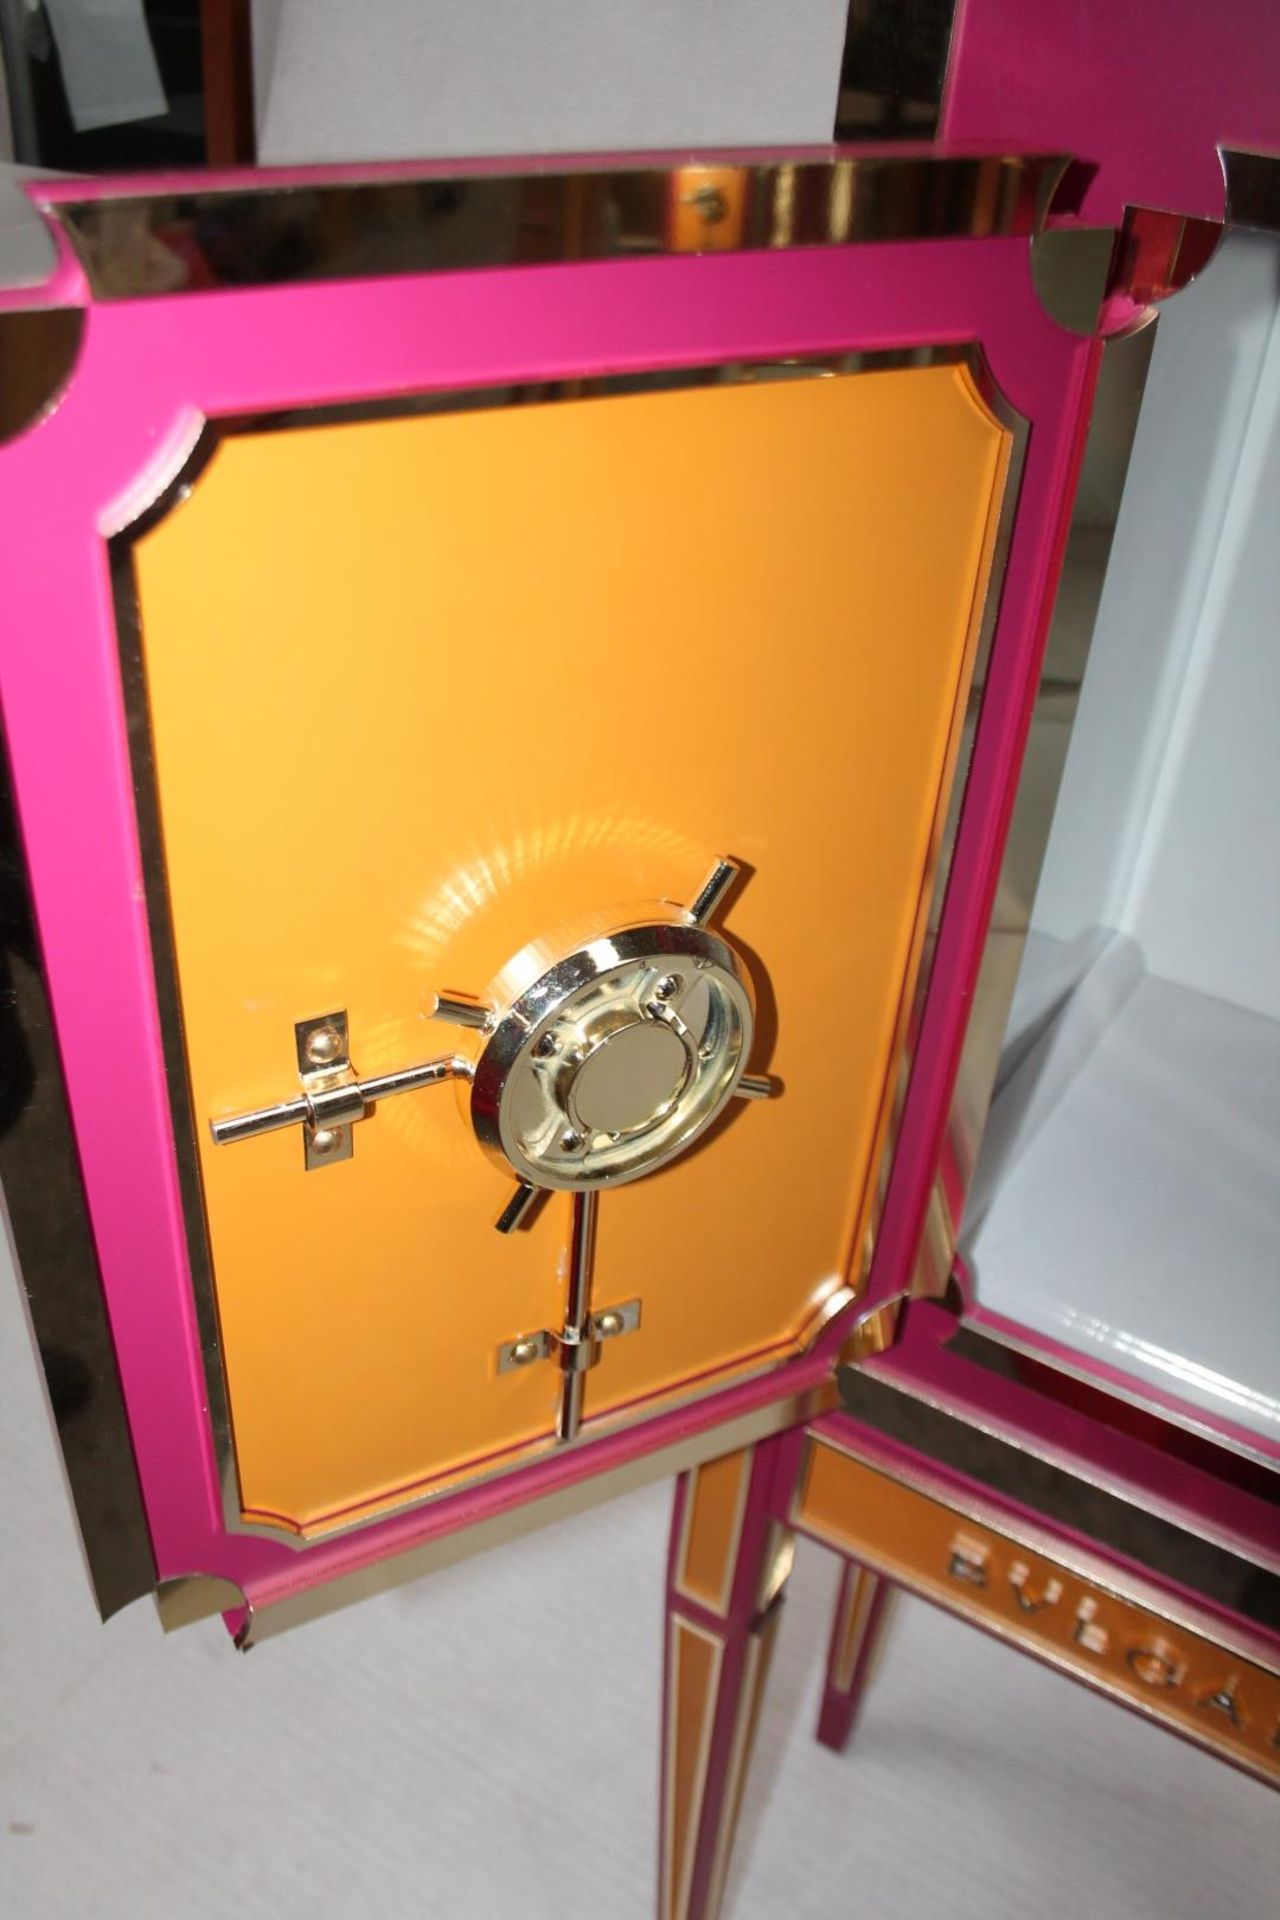 2 x Specially Commissioned Bank Vault Safe-style Illuminated Shop Display Dummy Props - Image 12 of 17